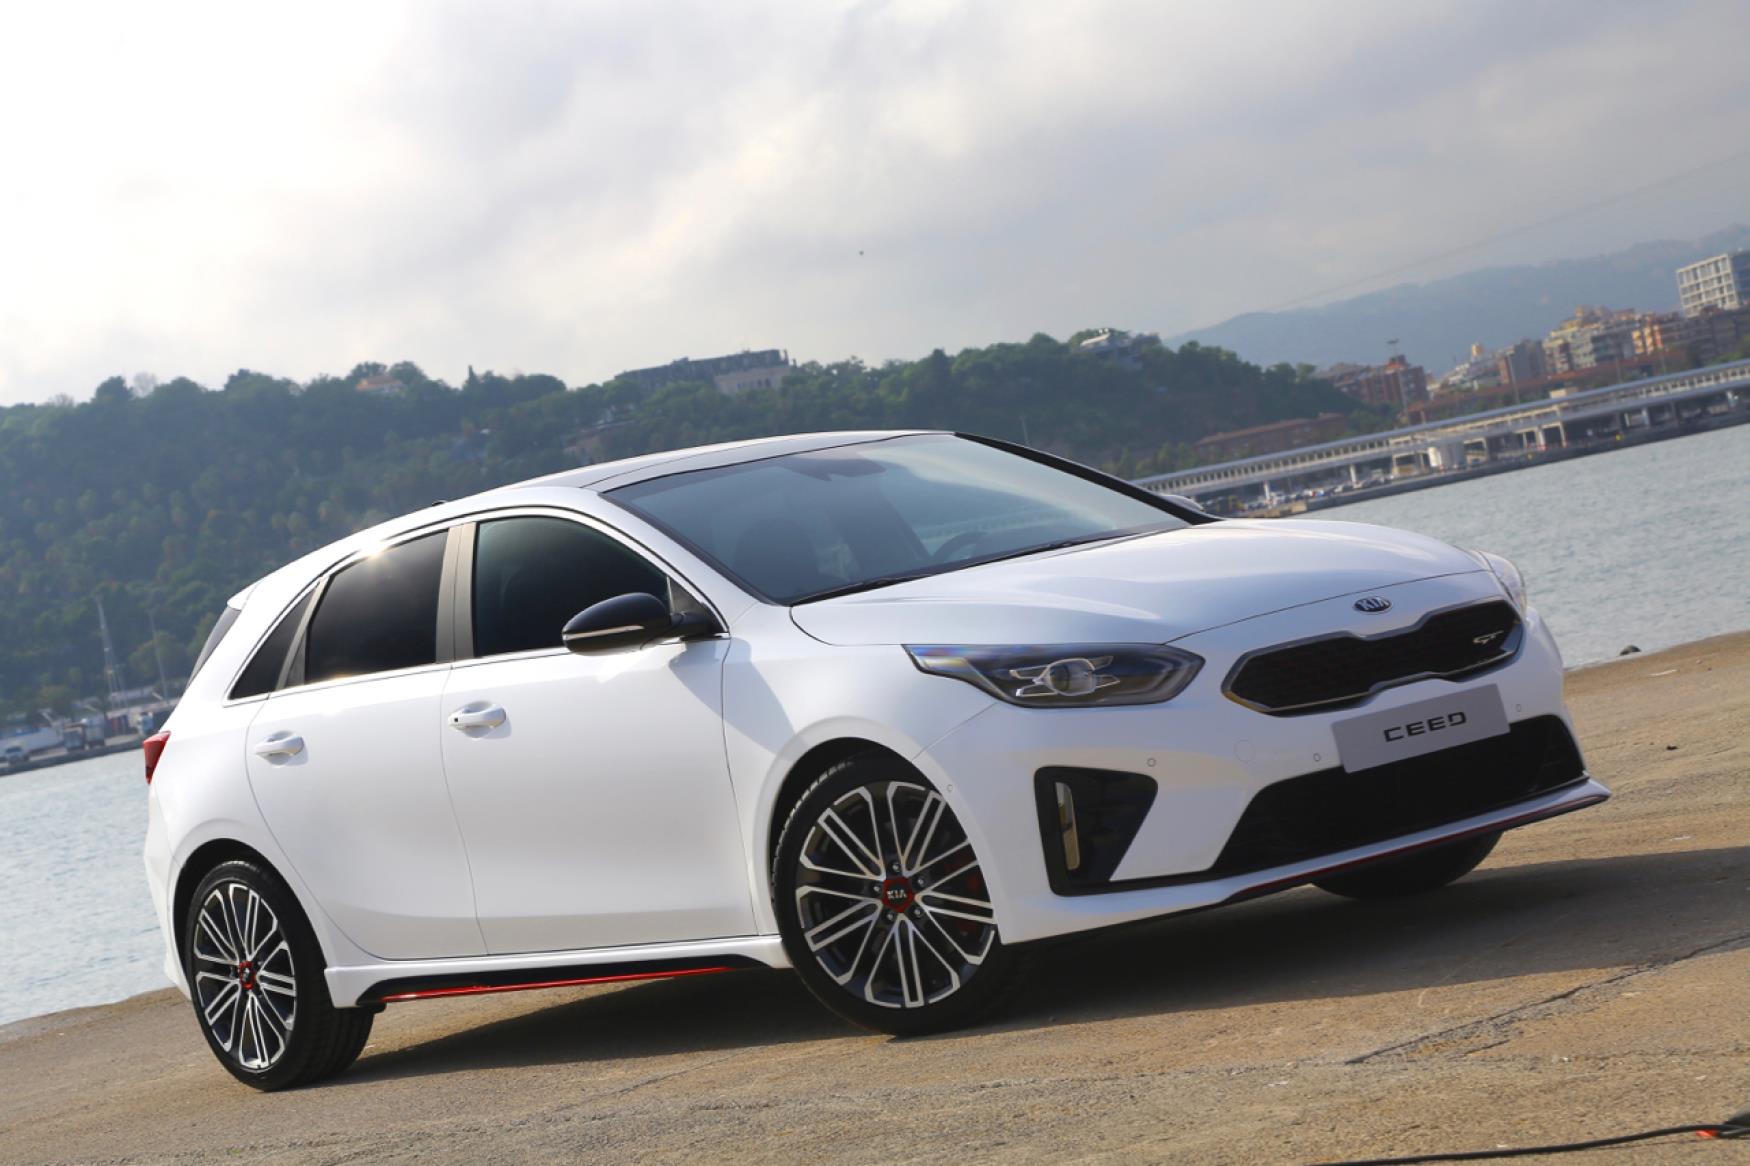 All-new Kia Ceed GT and GT-Line unveiled - First Vehicle Leasing